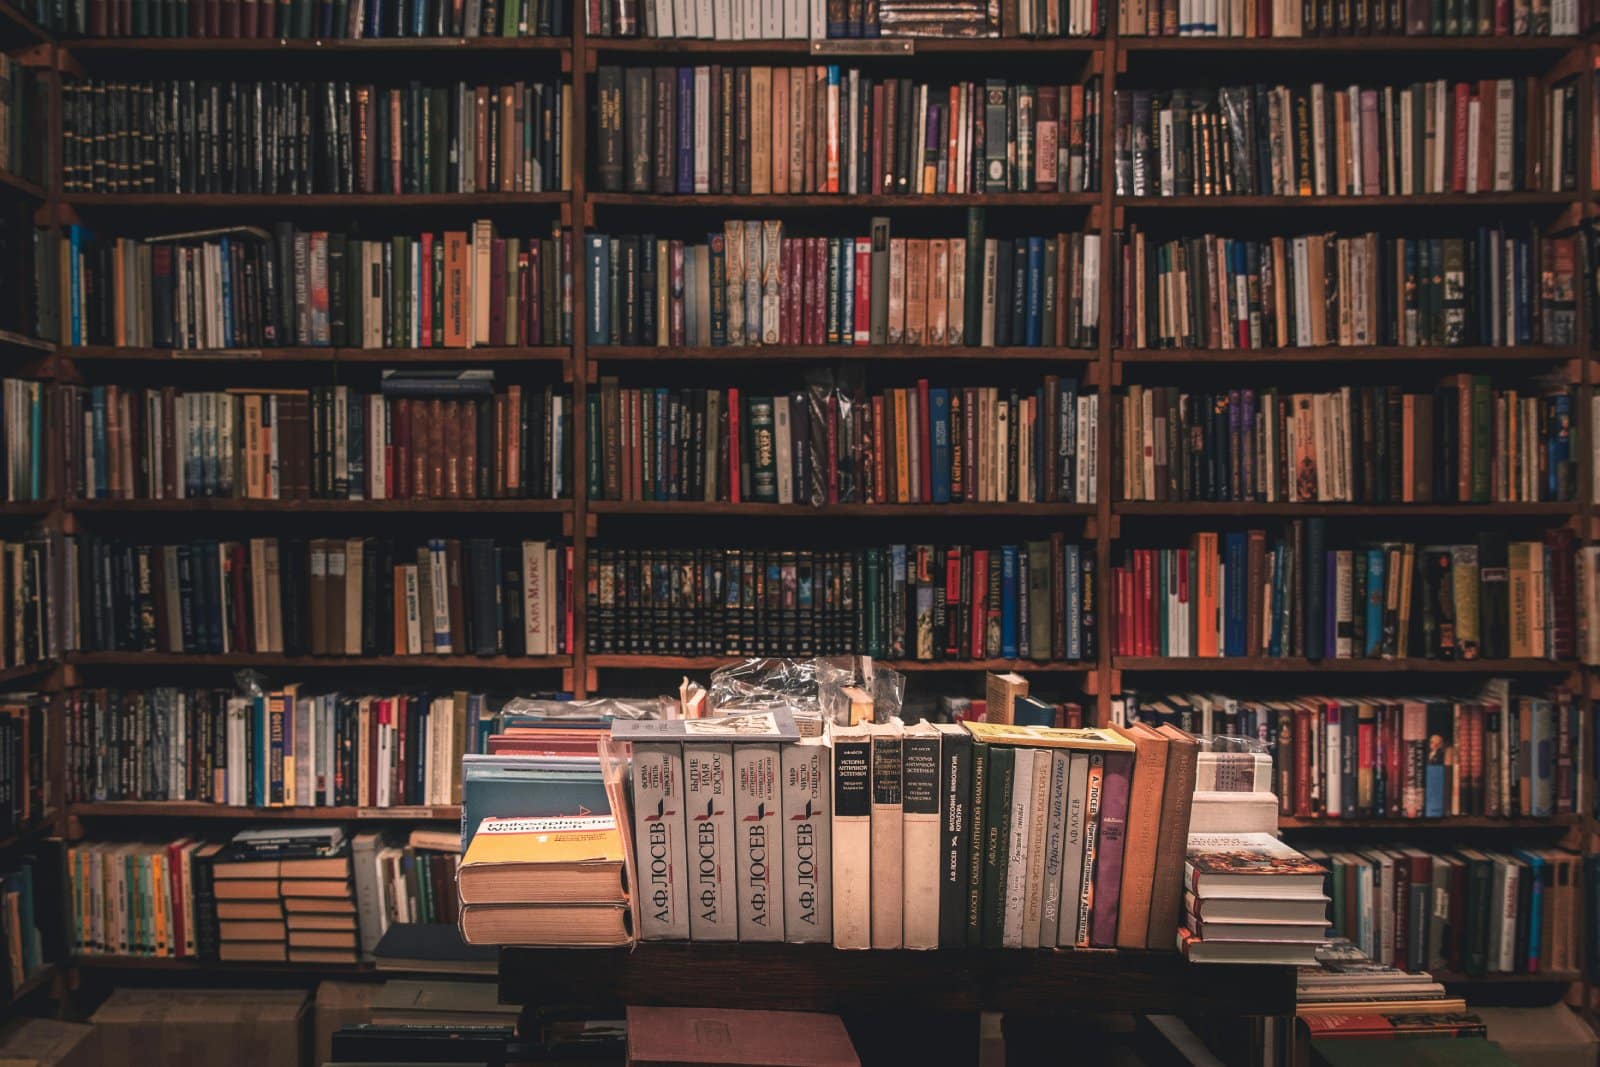 <p class="wp-caption-text">Image Credit: Pexels / Stanislav Kondratiev</p>  <p>A paradise for book lovers, The Last Bookstore is an iconic LA spot featuring new, used, and rare books in a quirky, labyrinthine space.</p>